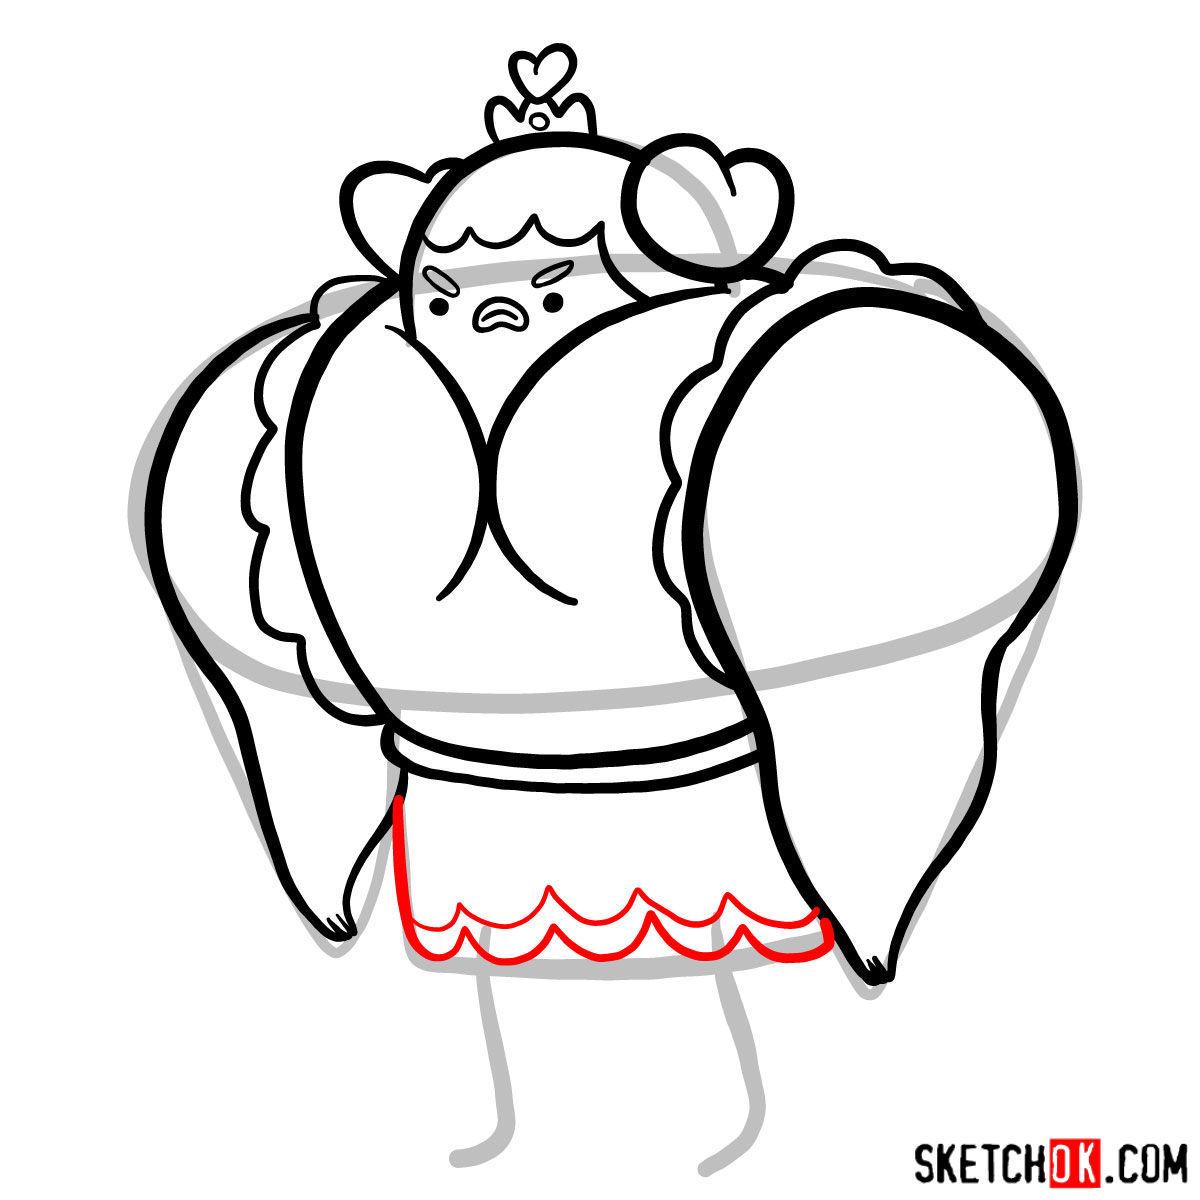 How to draw Muscle Princess from Adventure Time - step 08